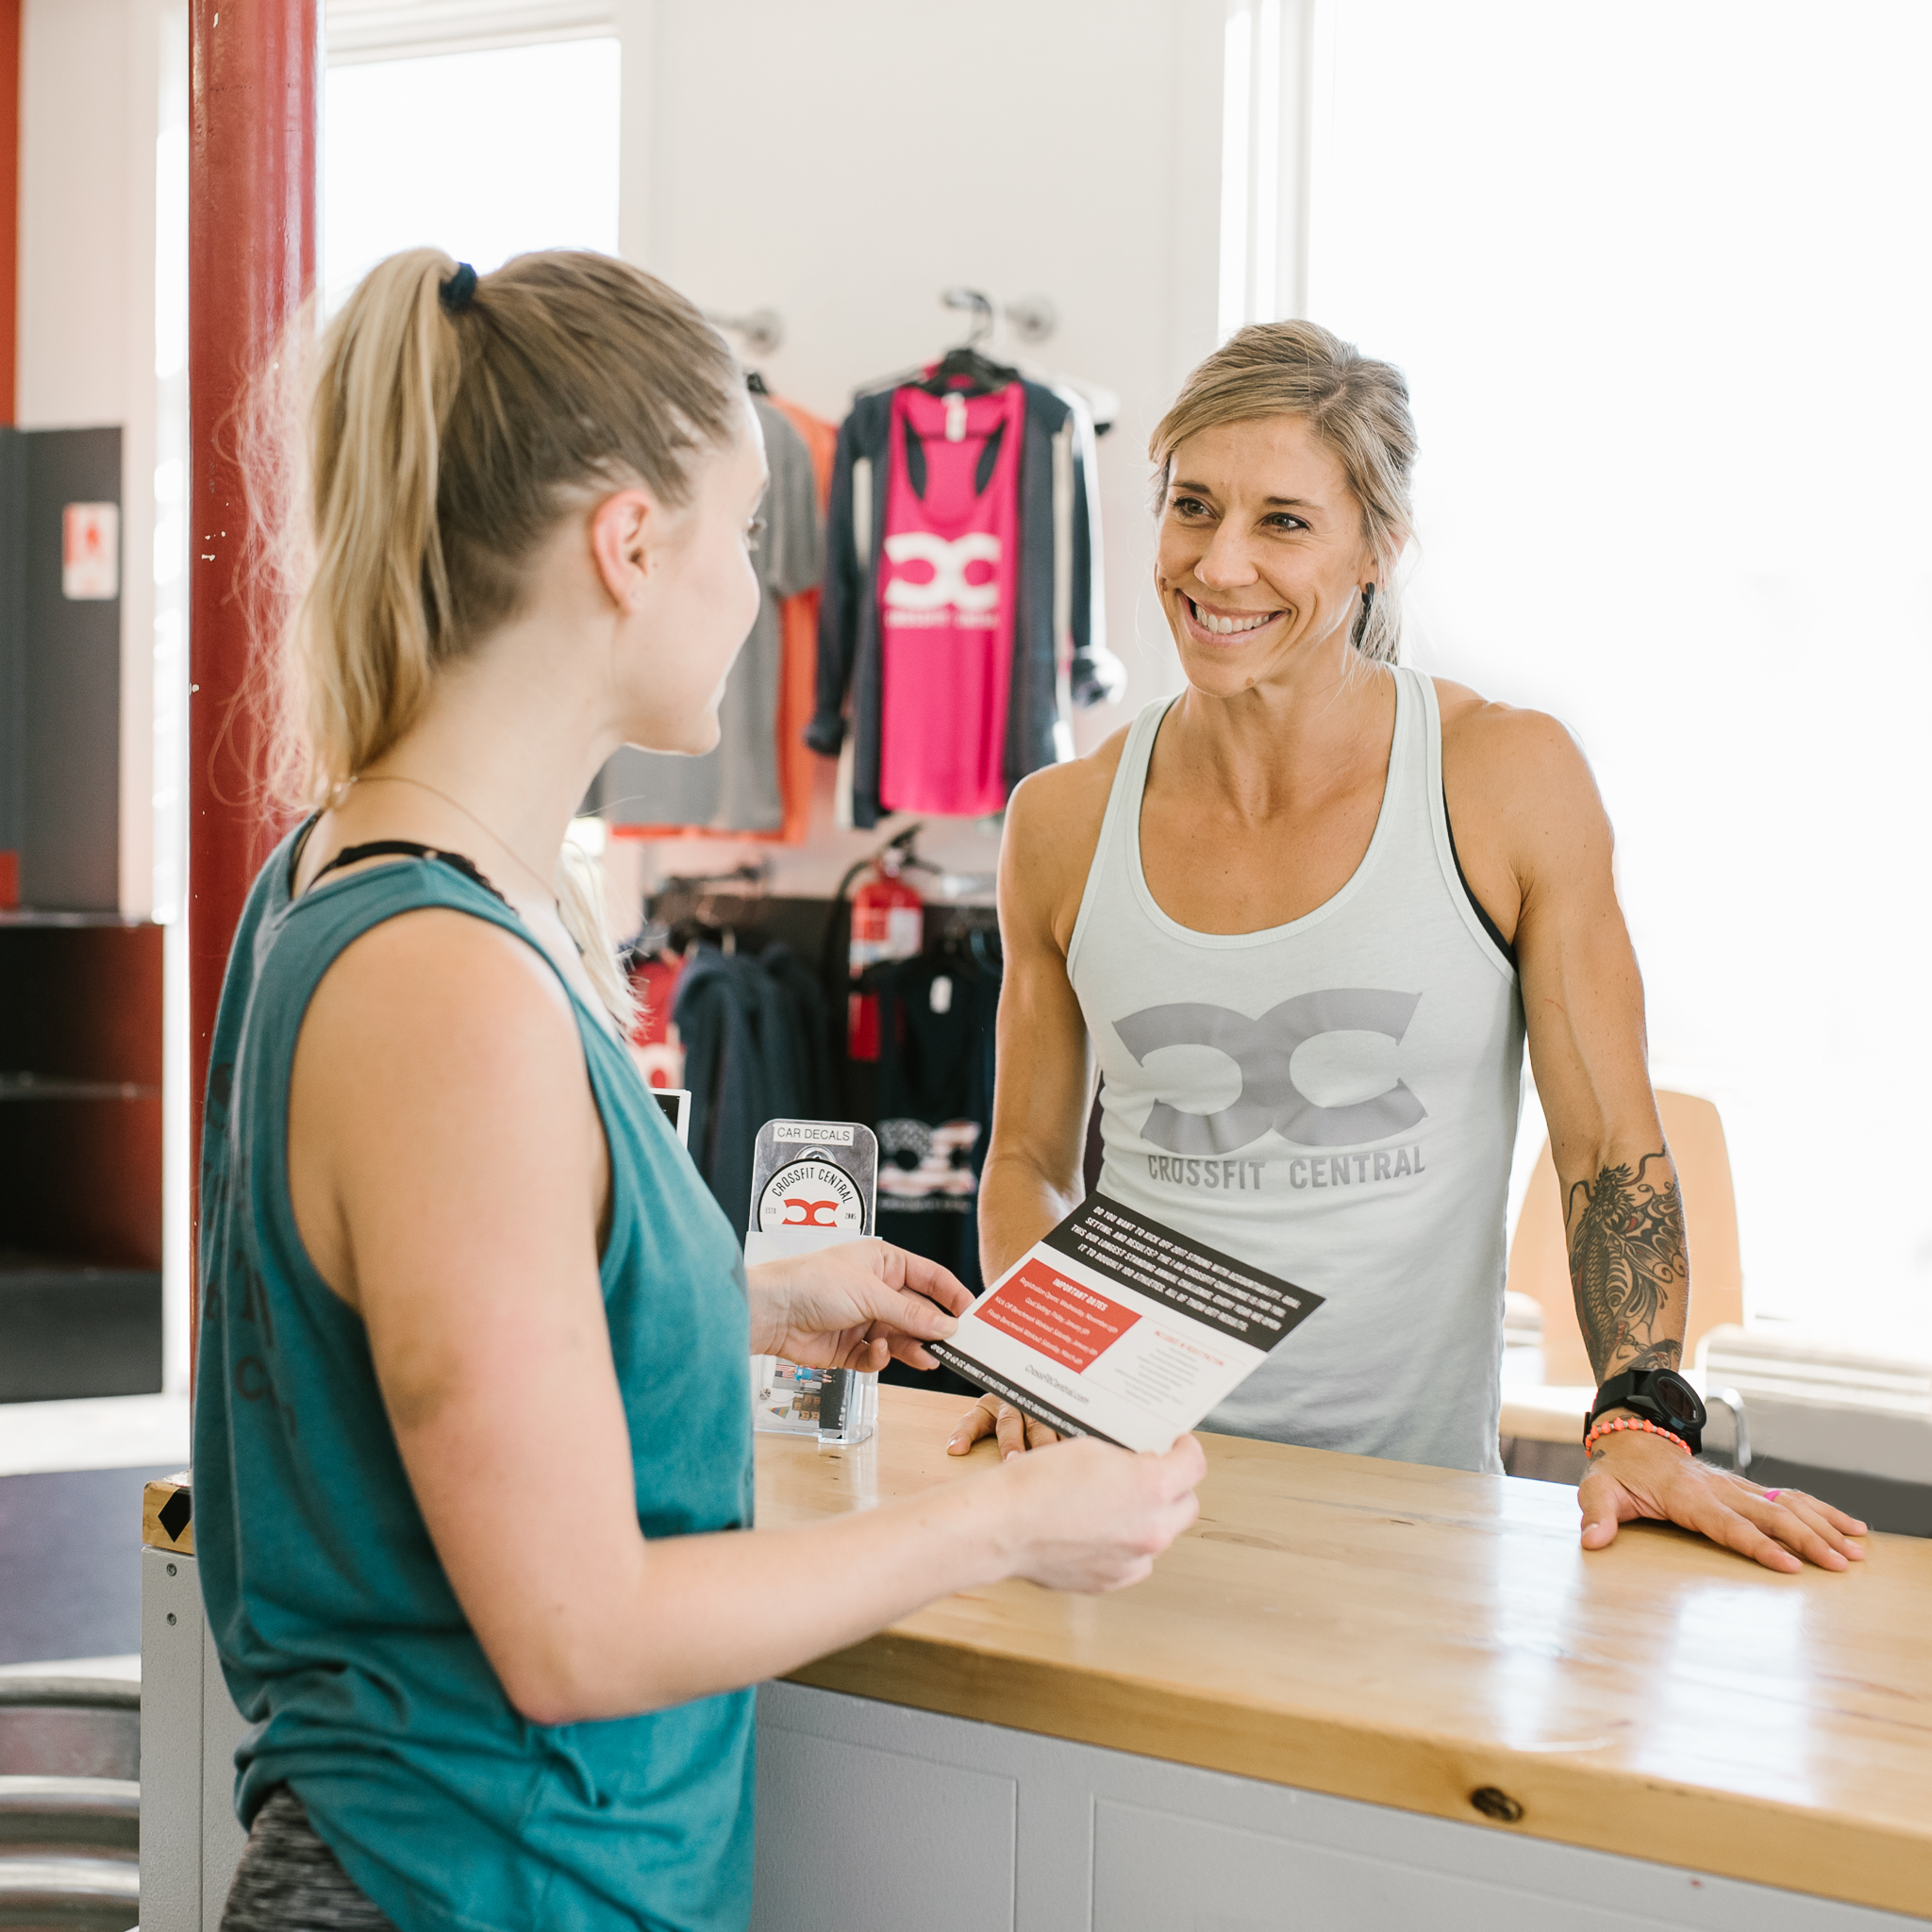 Austin and Round Rock Commercial Photography - Emily Ingalls Photography - Sports and Fitness Photography - CrossFit Central_CrossFit and Weight lifting Photography-4.jpg